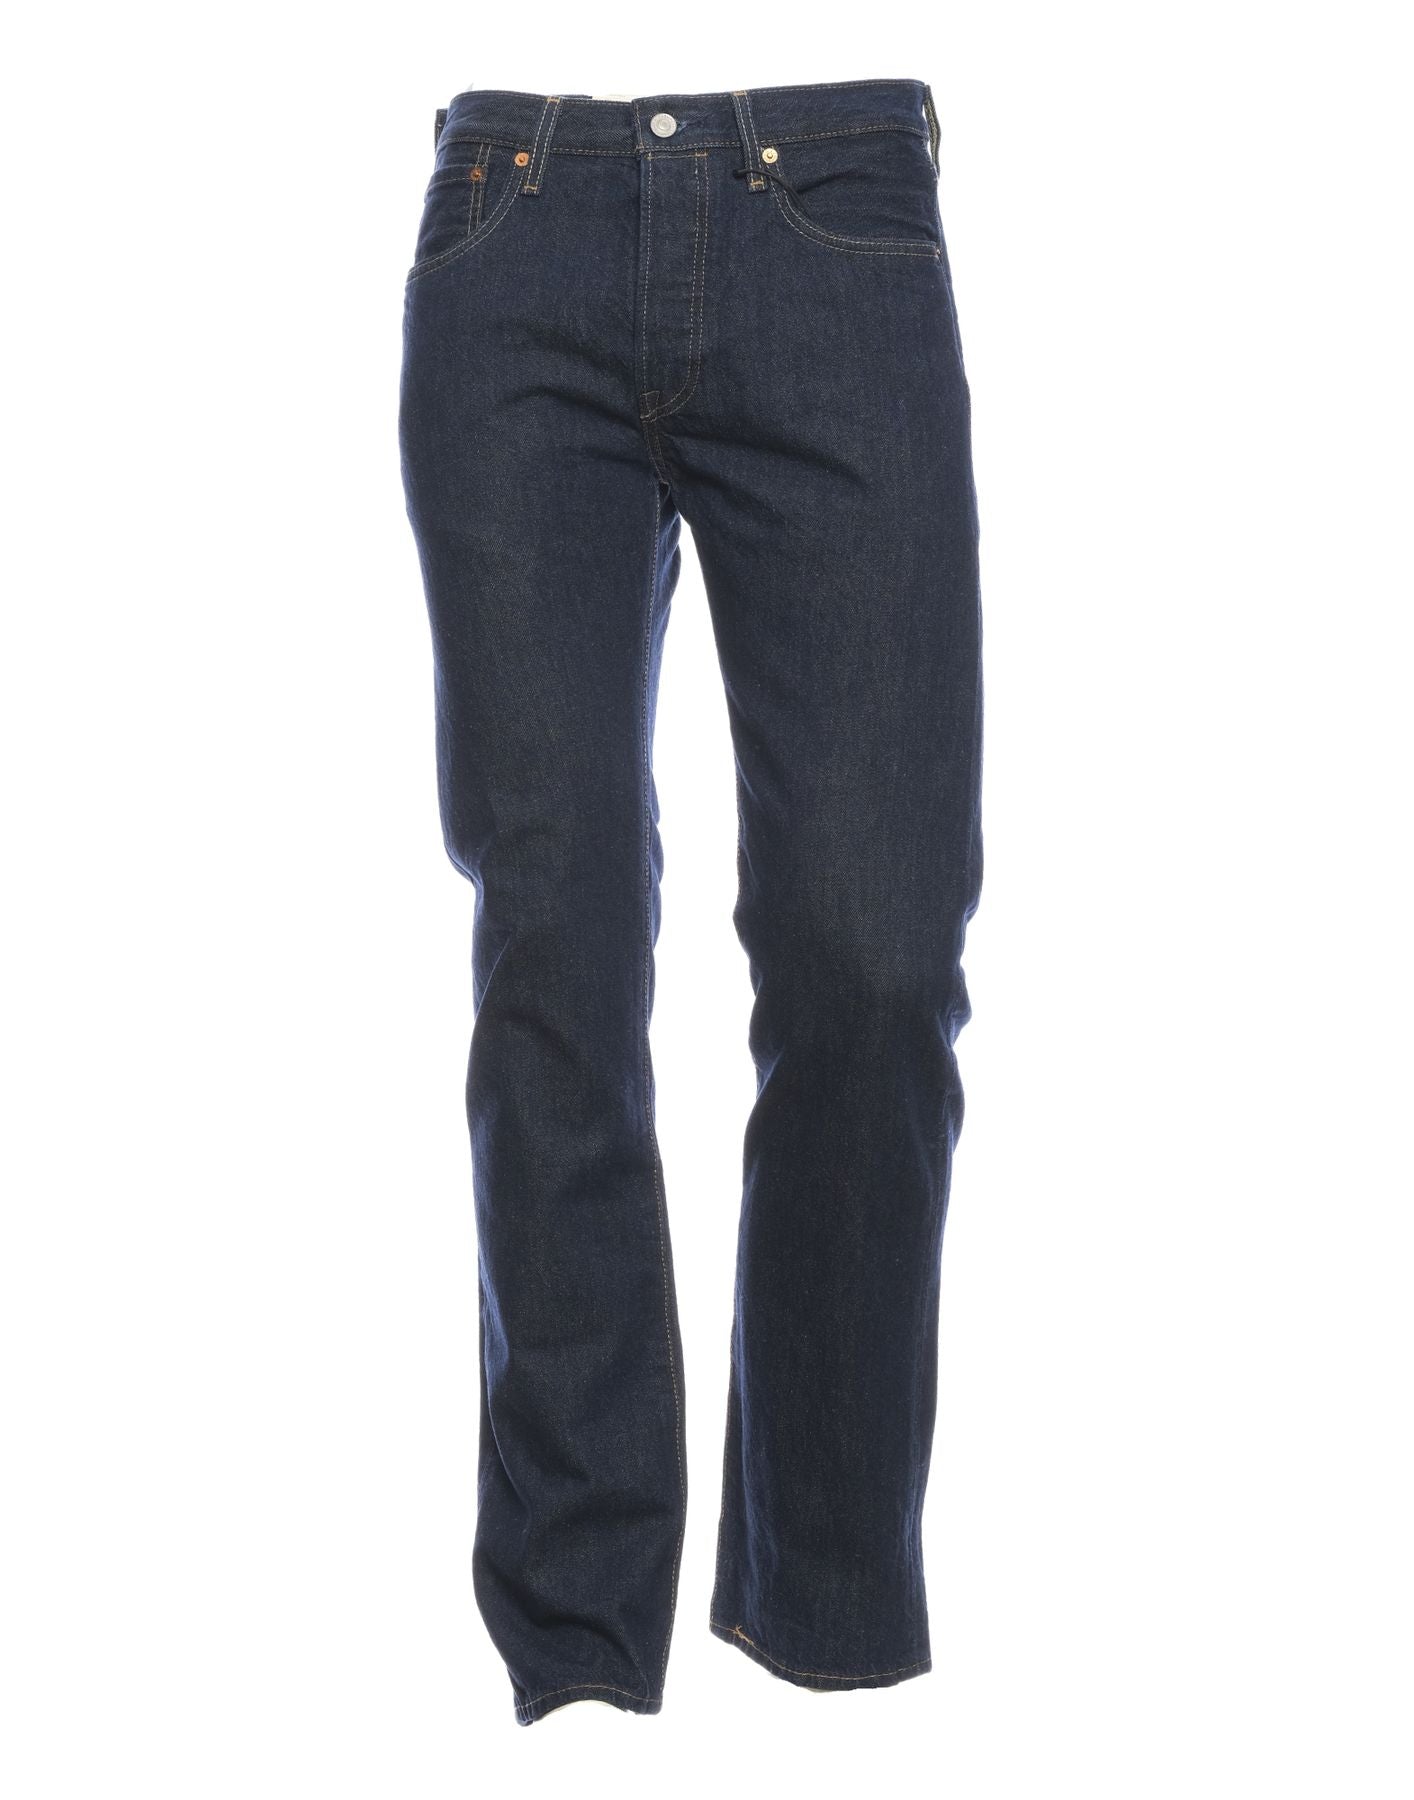 Jeans for man 005010101 Levi's